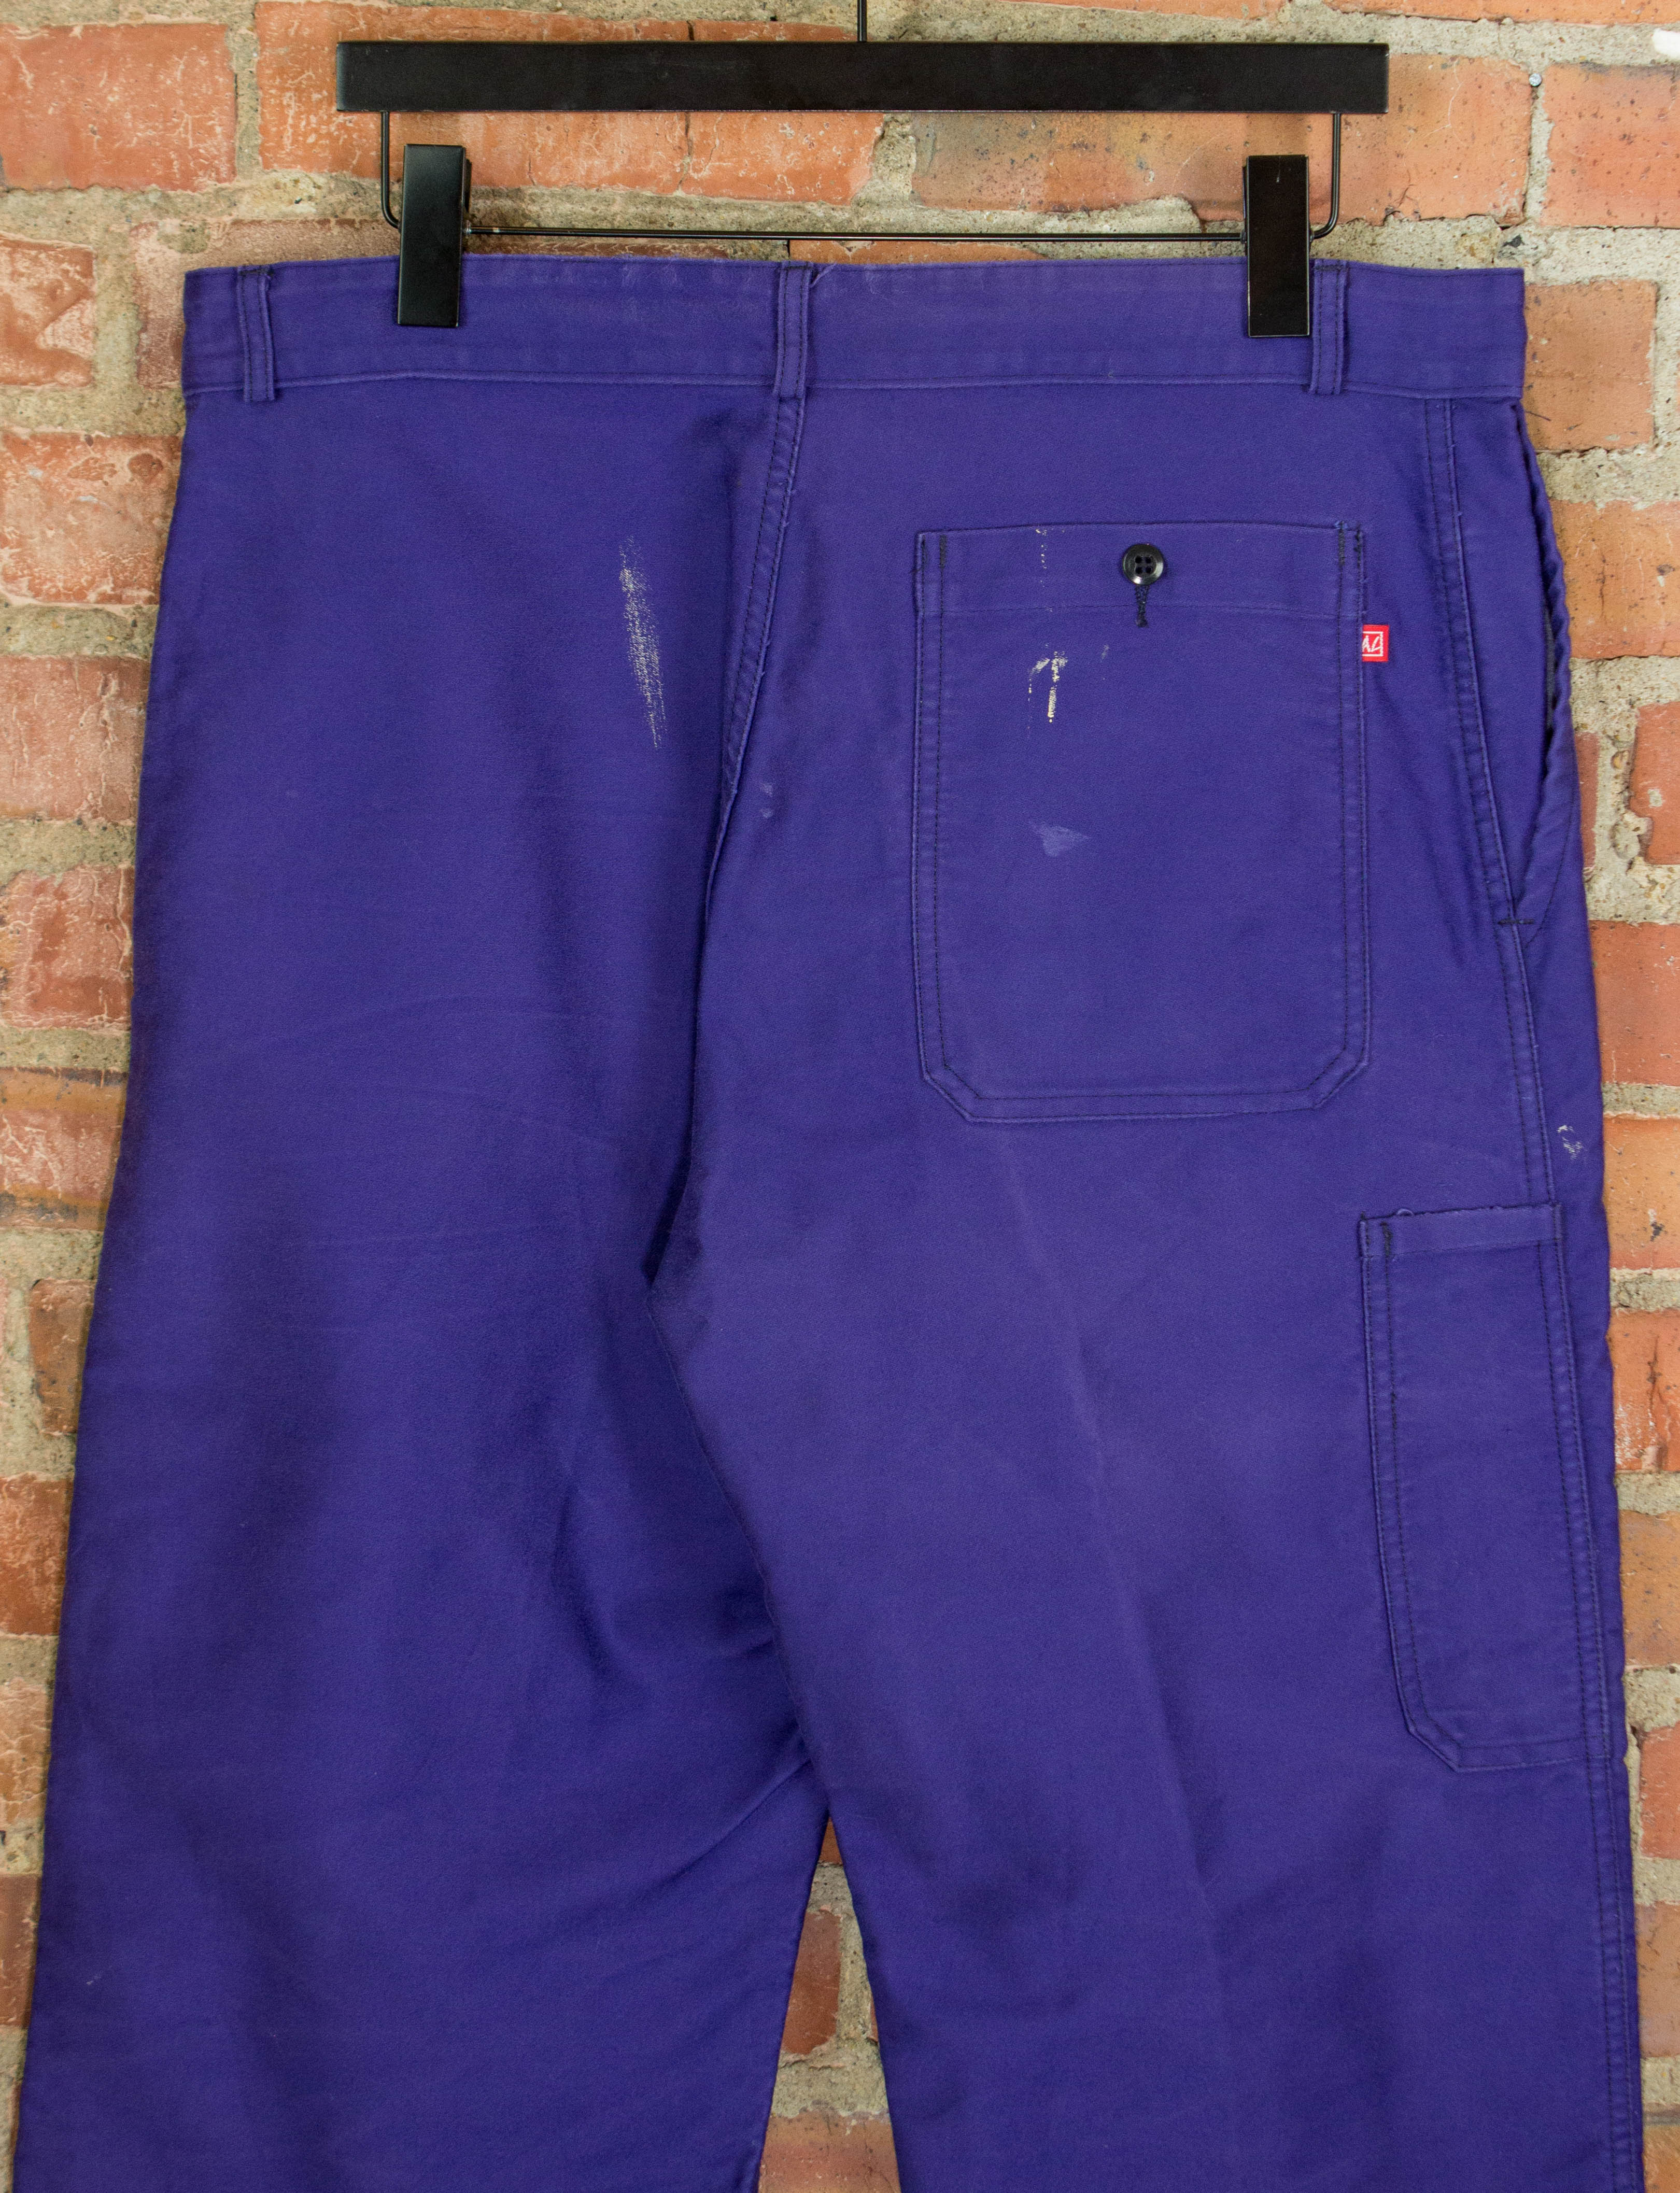 Vintage Adolphe Lafont Faded Purple Moleskin French Work Pants 